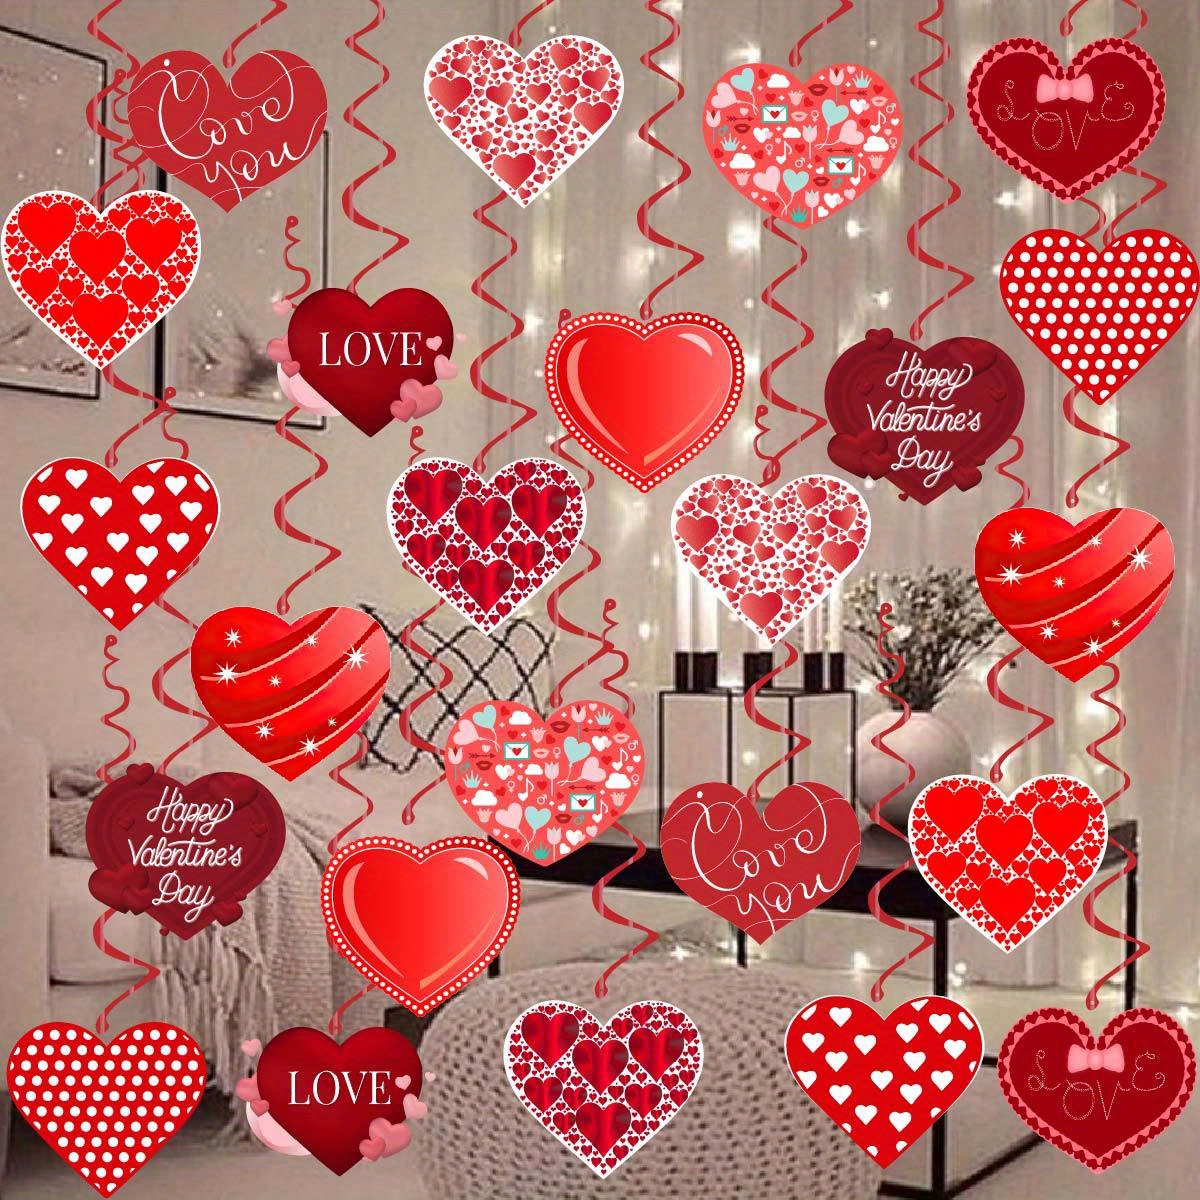 6pcs Hanging Heart Swirl Decorations Red Heart Swirls Spiral Wedding  Decorations No DIY Romantic Decorations Shiny Foil Red Swirls For  Valentines Day